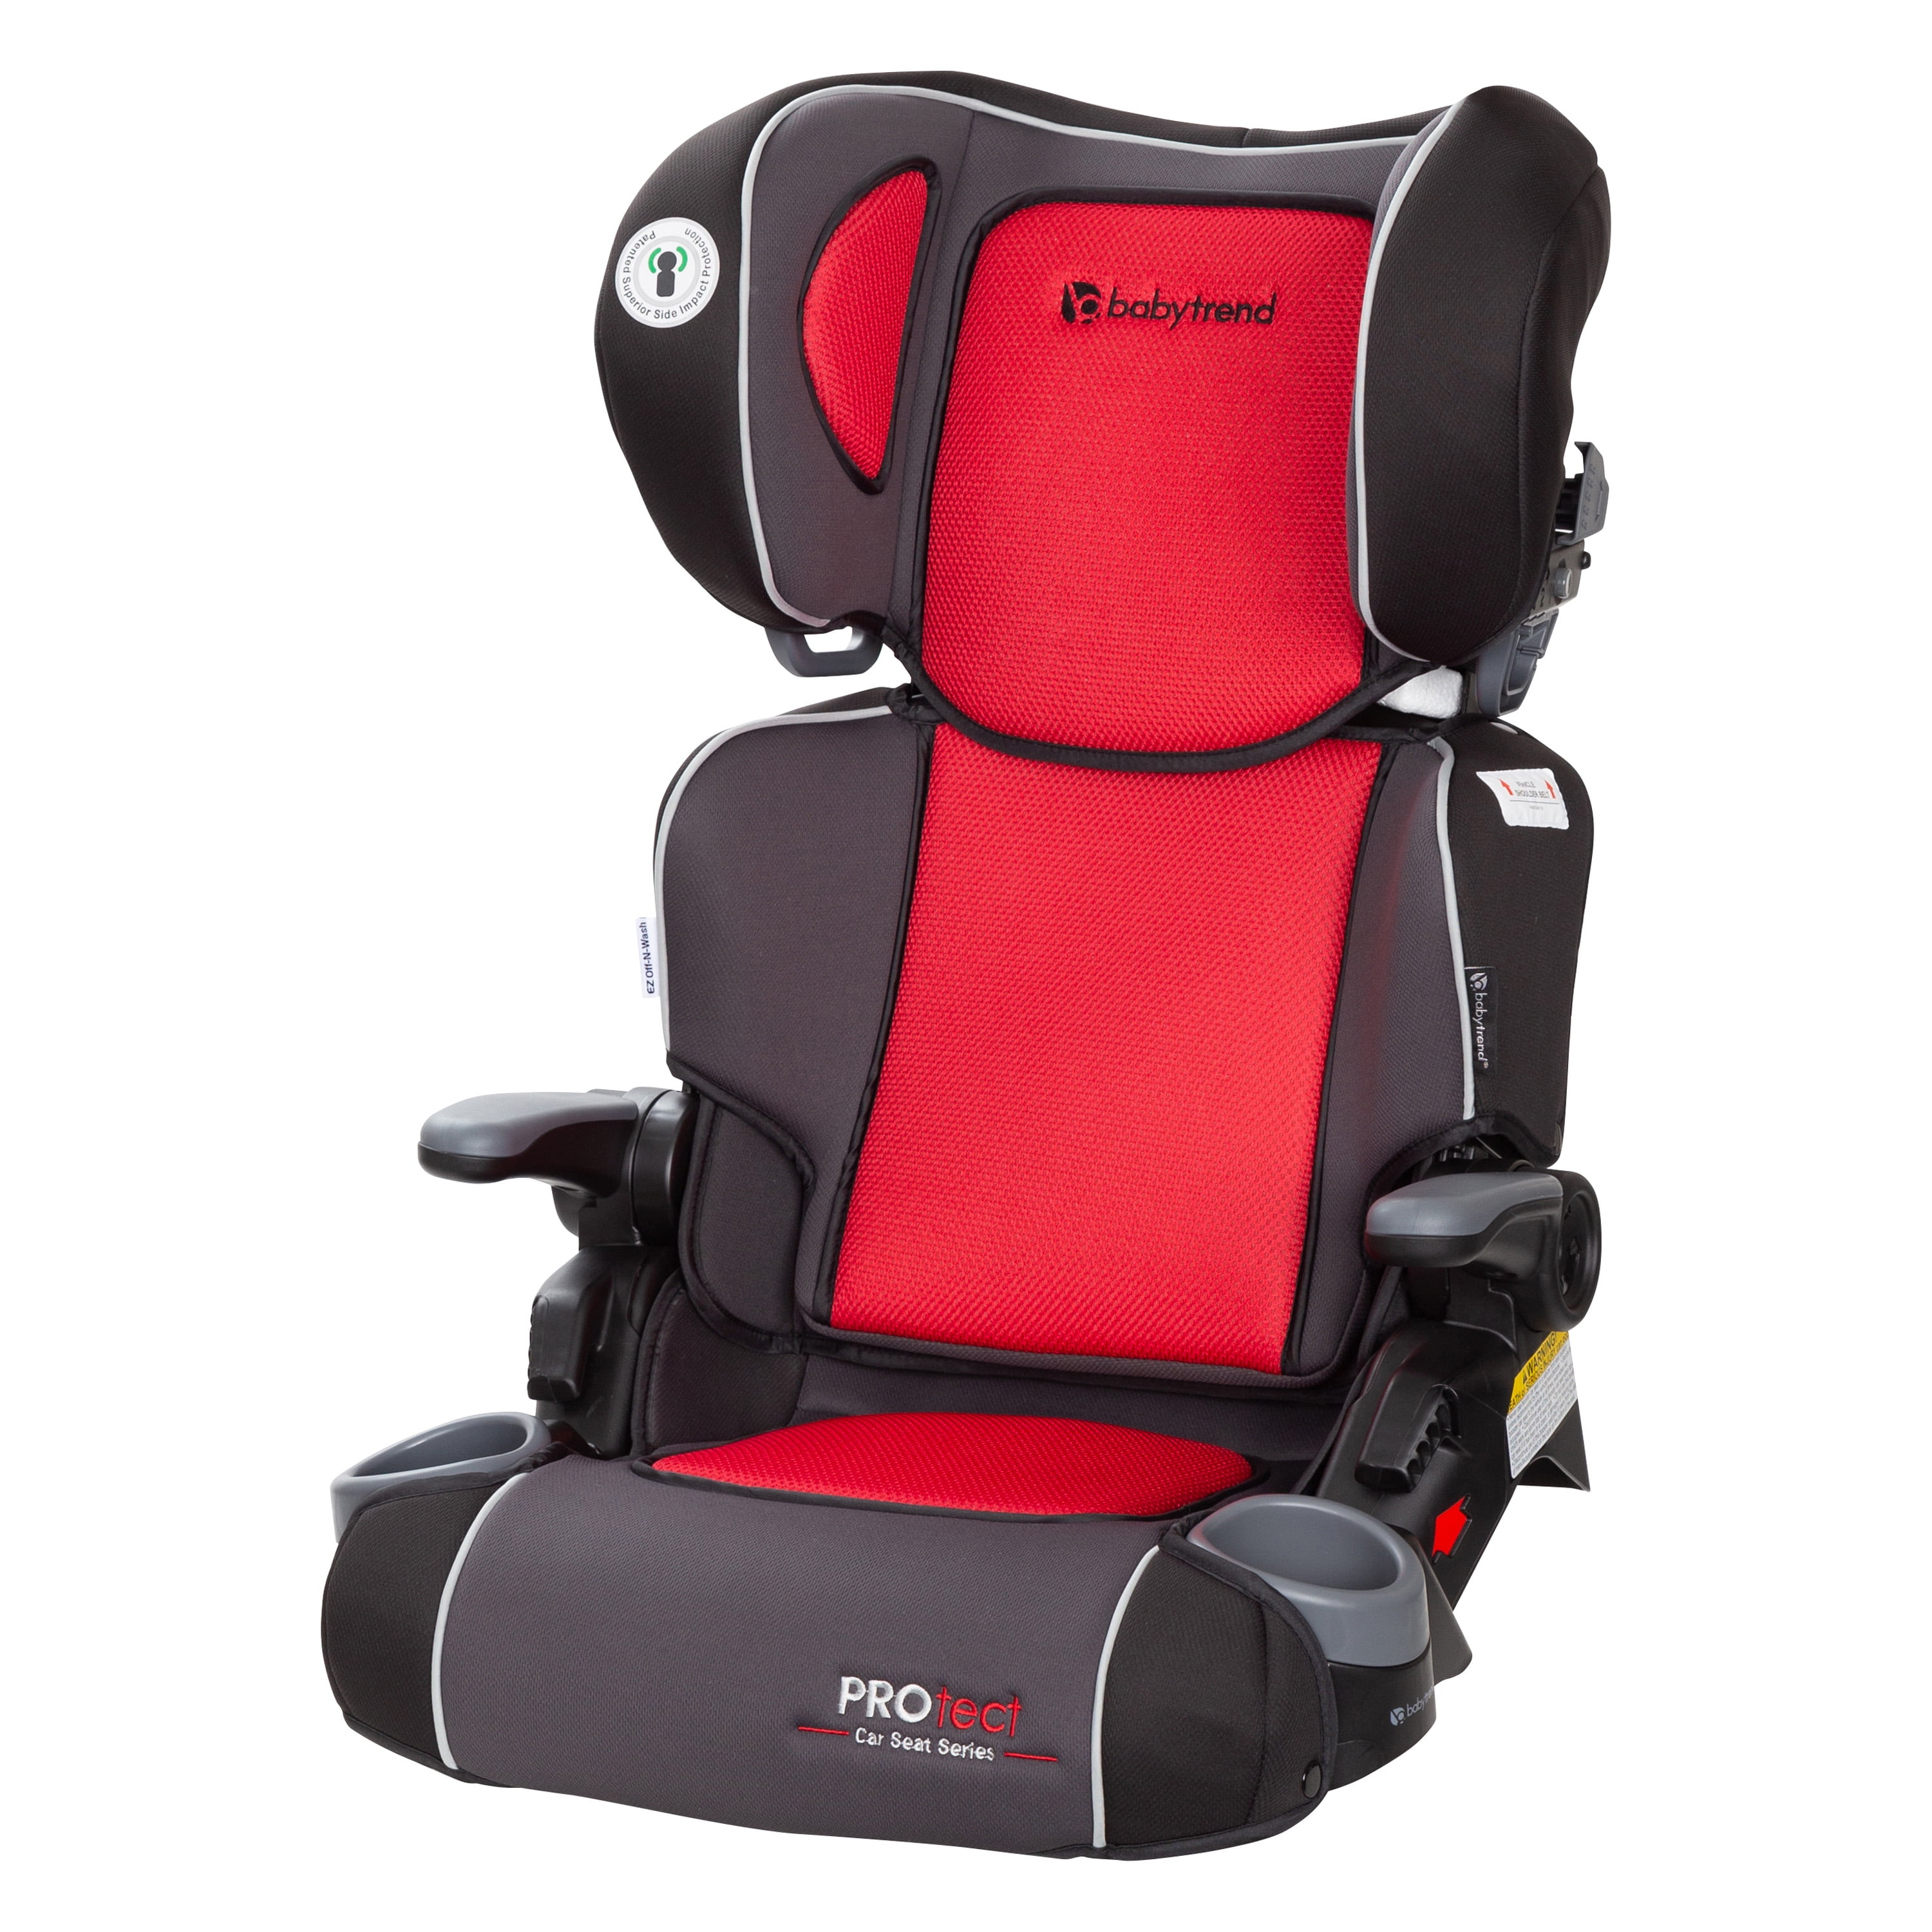 Travel Car Seat For A 5 Year Old, What Size Car Seat For A 5 Year Old